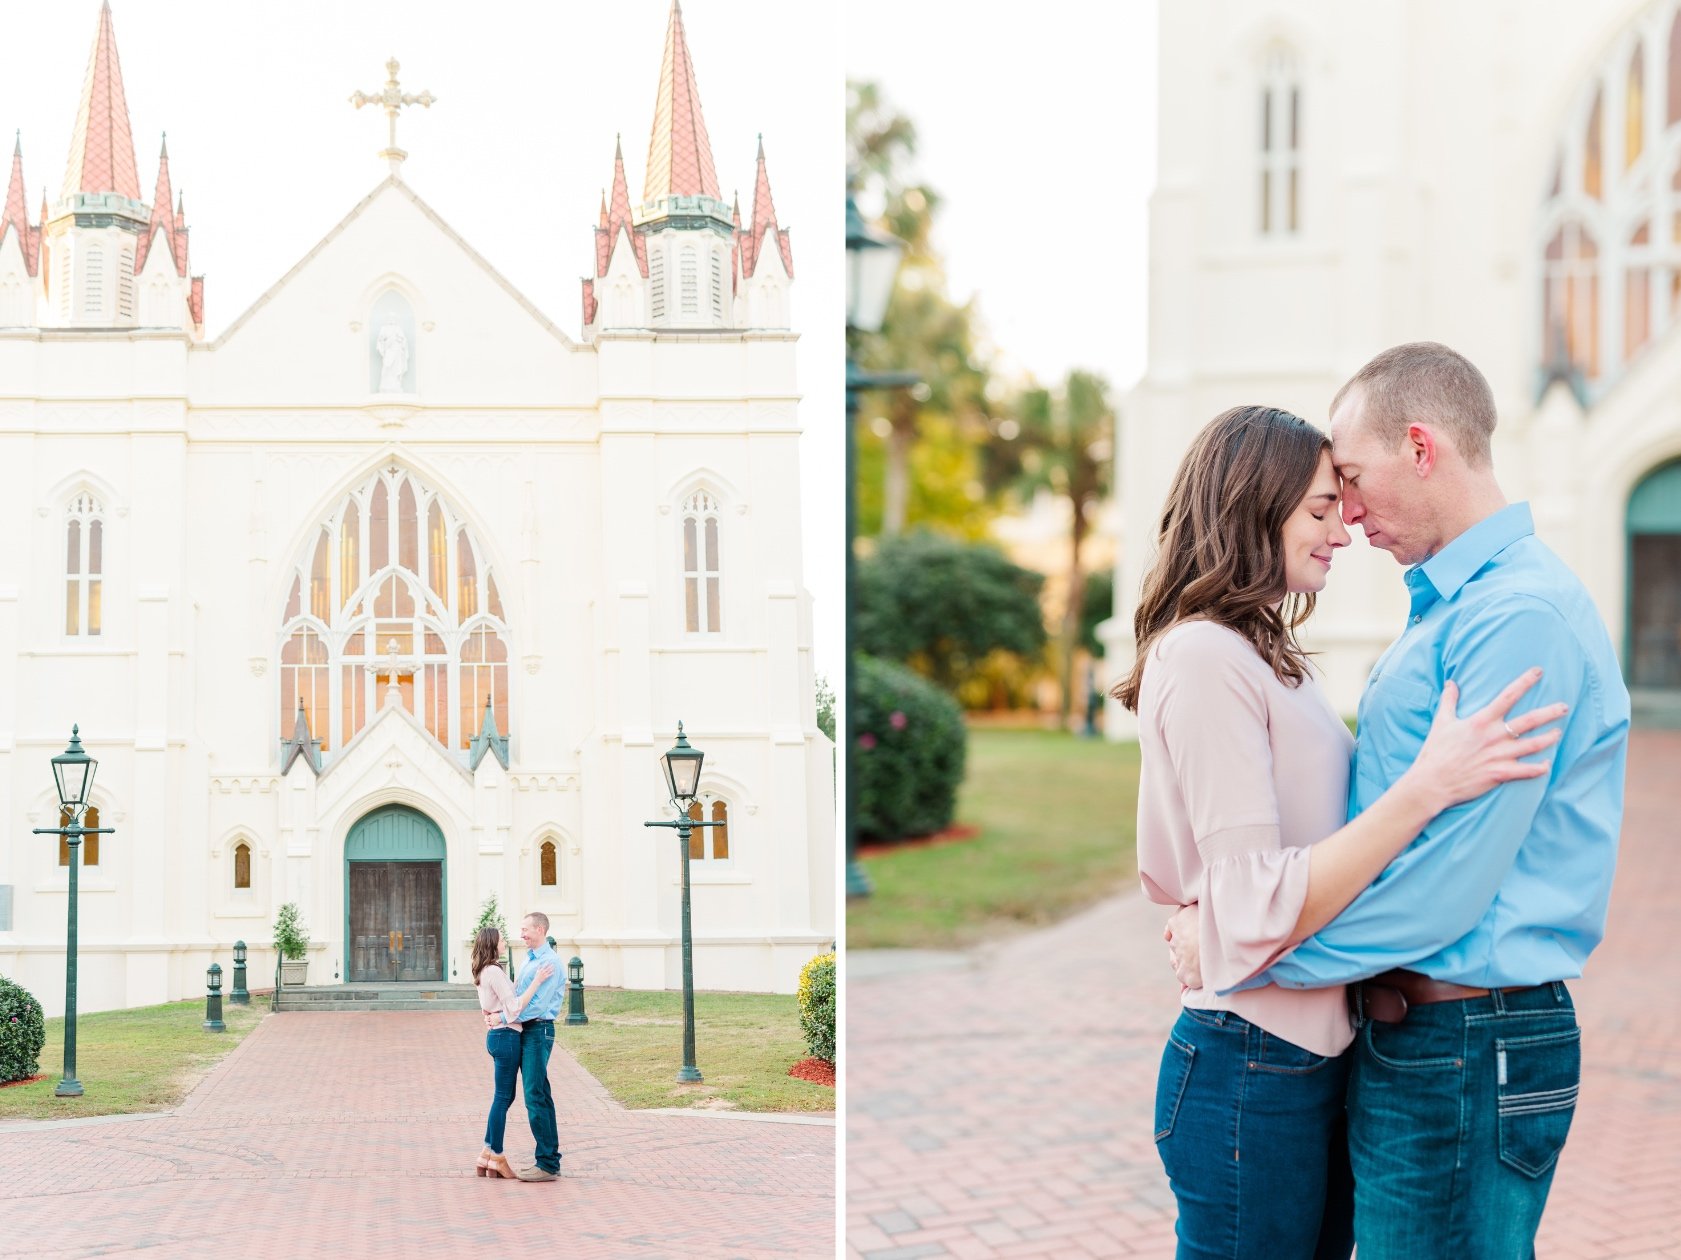 Fall Spring Hill College Engagement Session Photographed by Kristen Marcus Photography